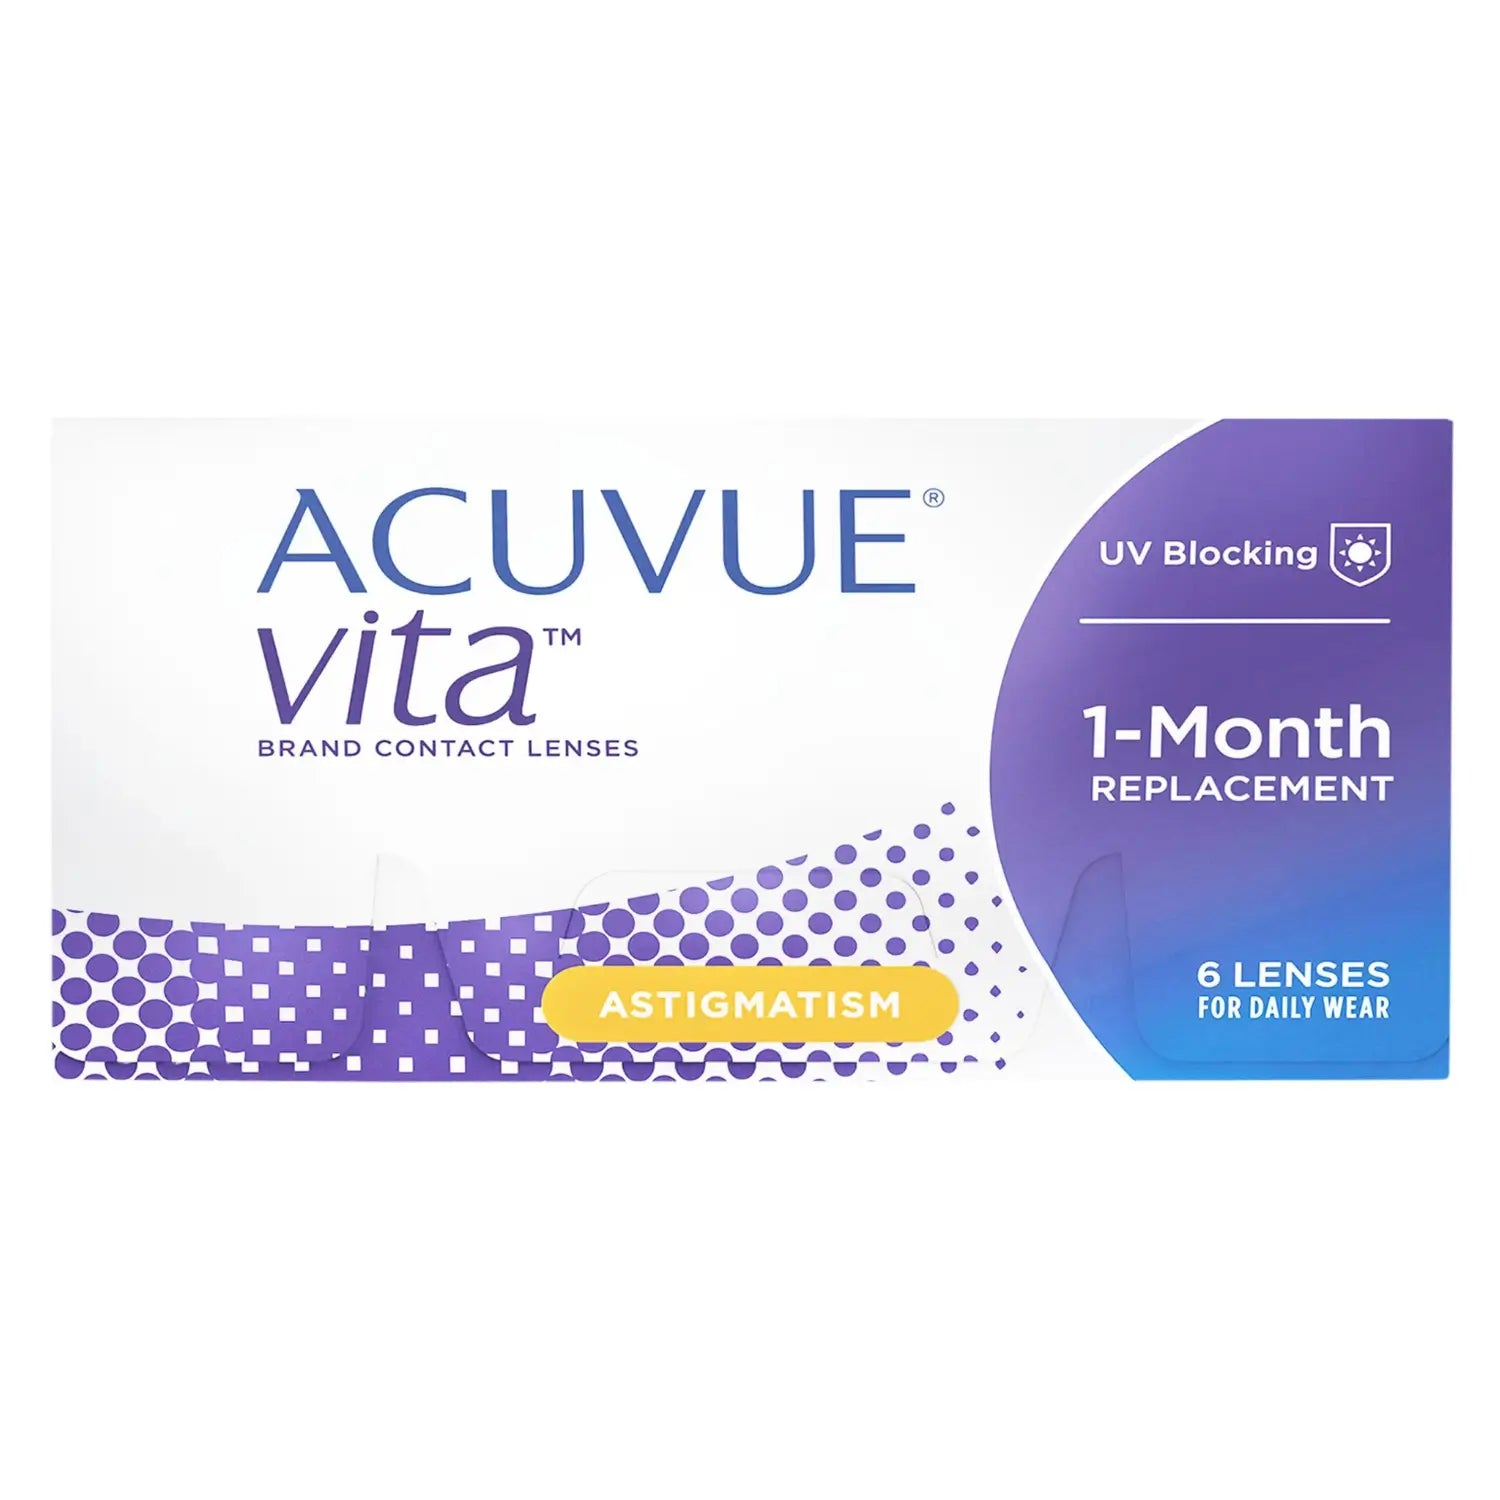 Acuvue Vita certified contact lenses online at best price